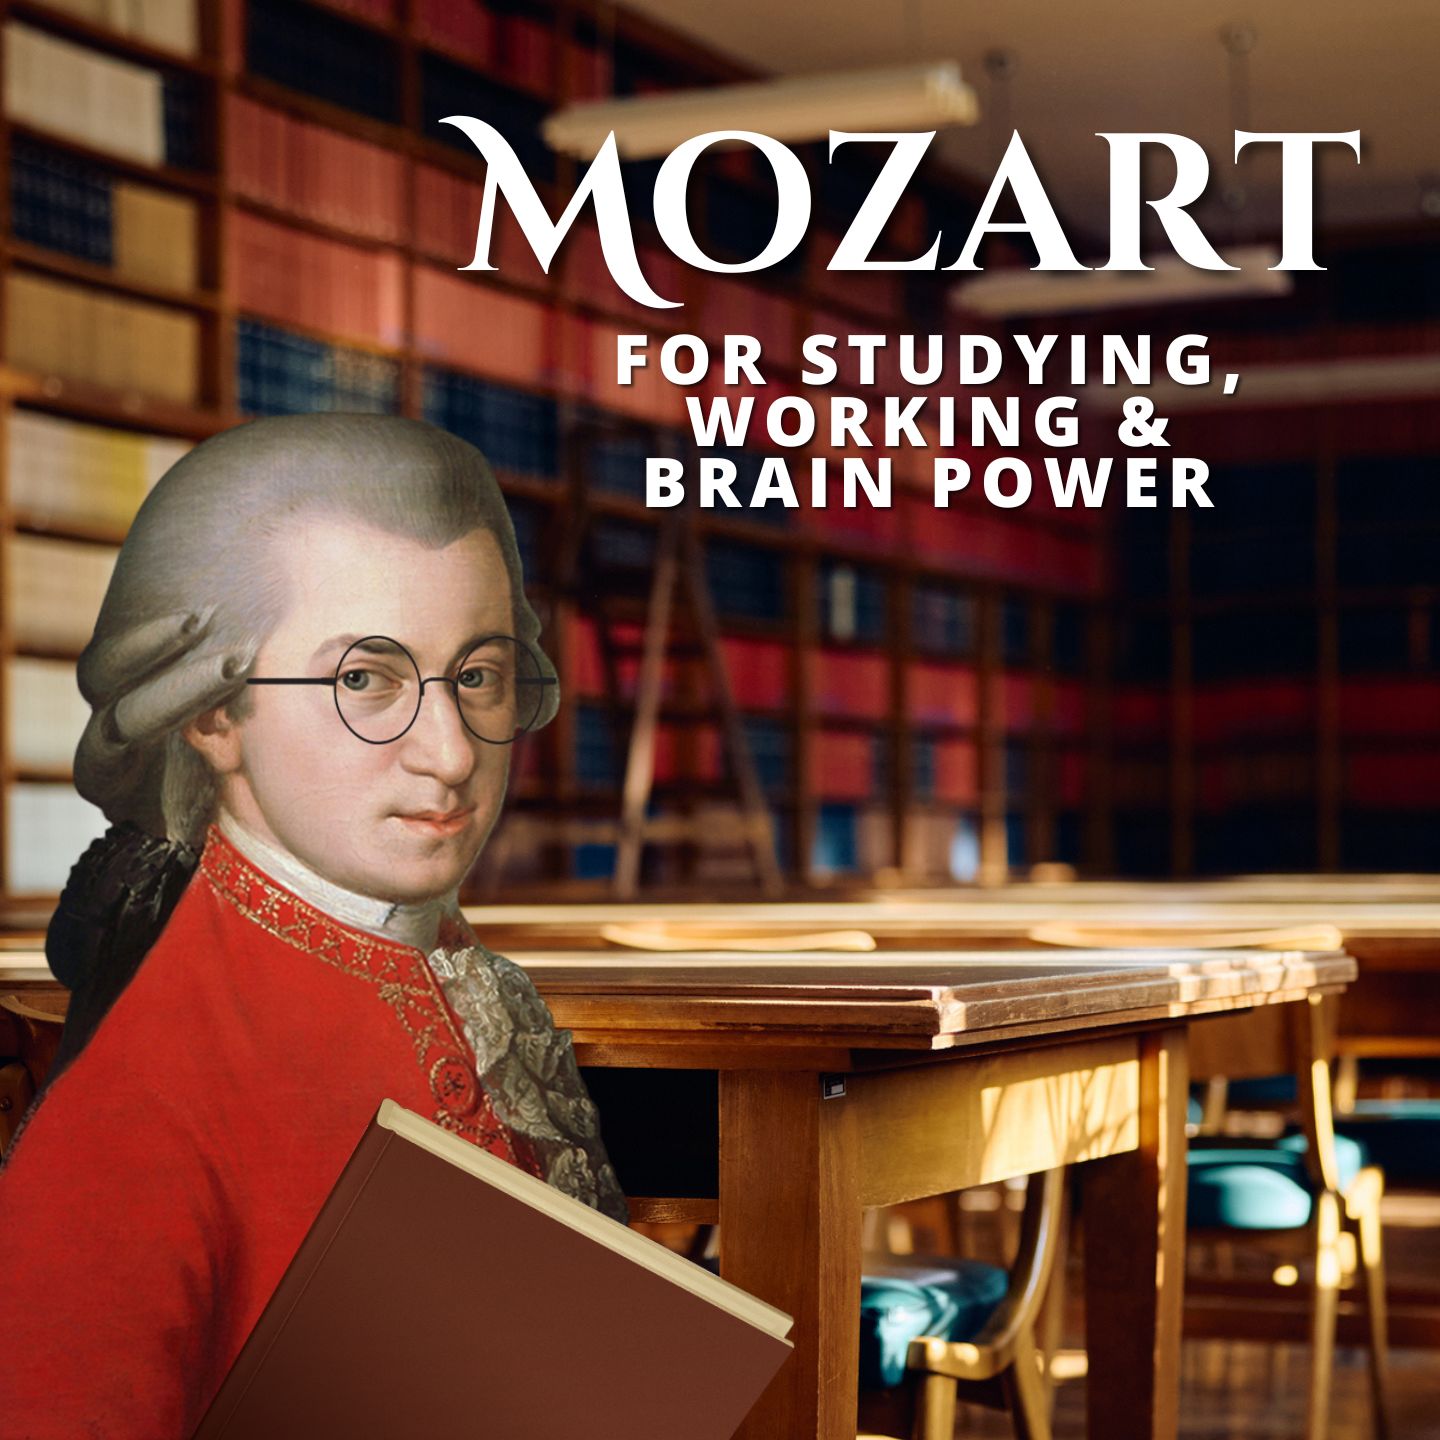 Mozart: Classical Music for Studying, Working & Brain Power